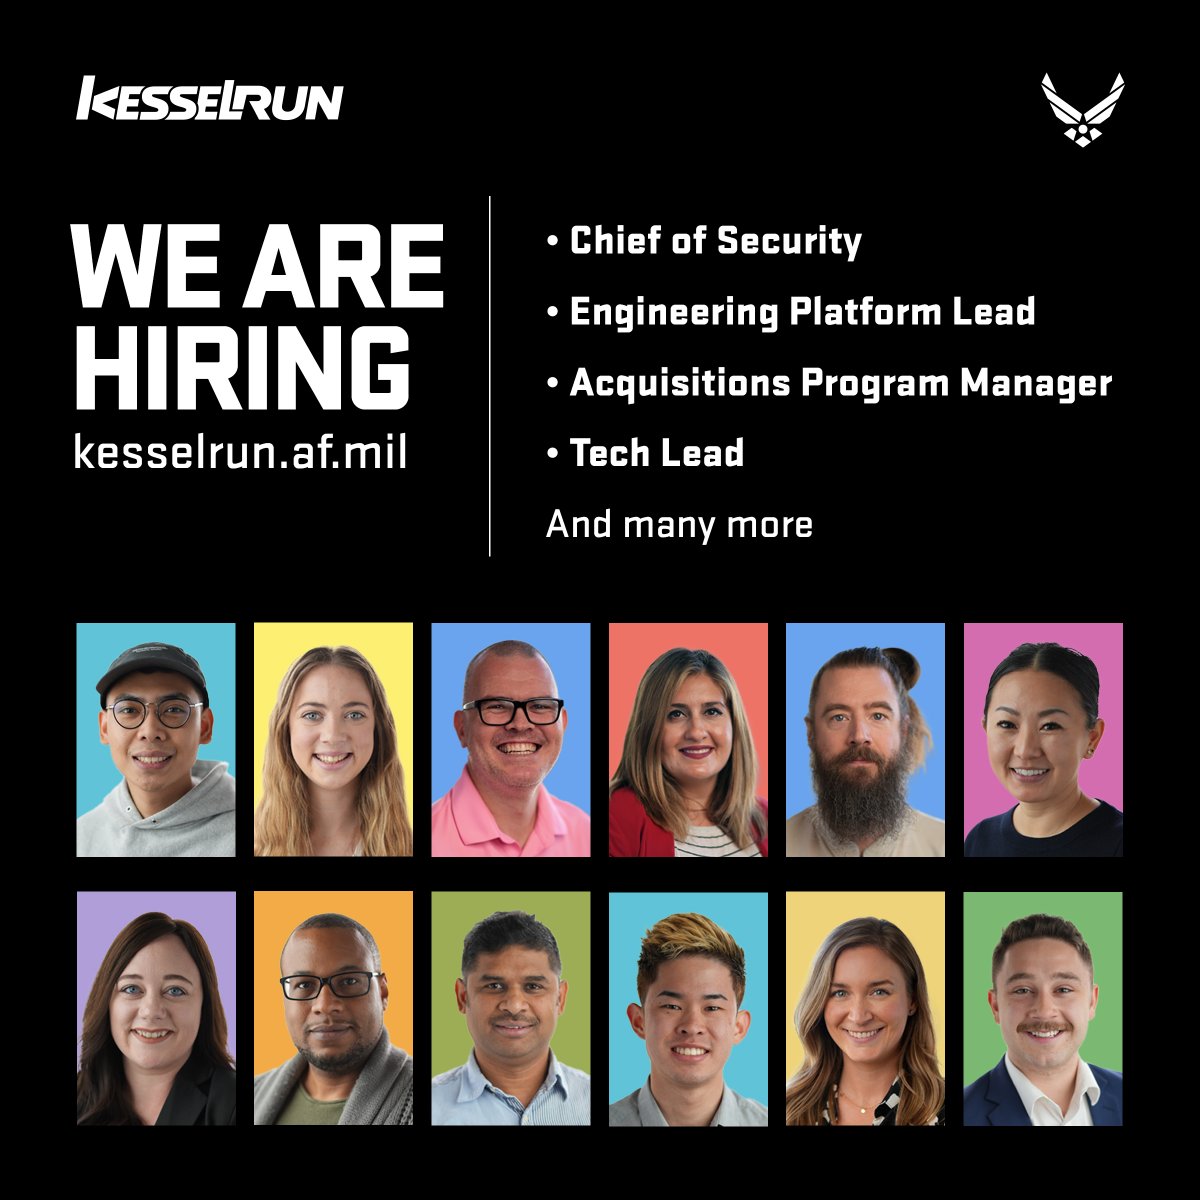 Kessel Run is #hiring for several civilian positions that will champion change across our unit and beyond, including Chief of Security, Engineering Platform Lead and several more.

Apply today – positions close Monday, February 12. 
ow.ly/UAHL50QwZZn